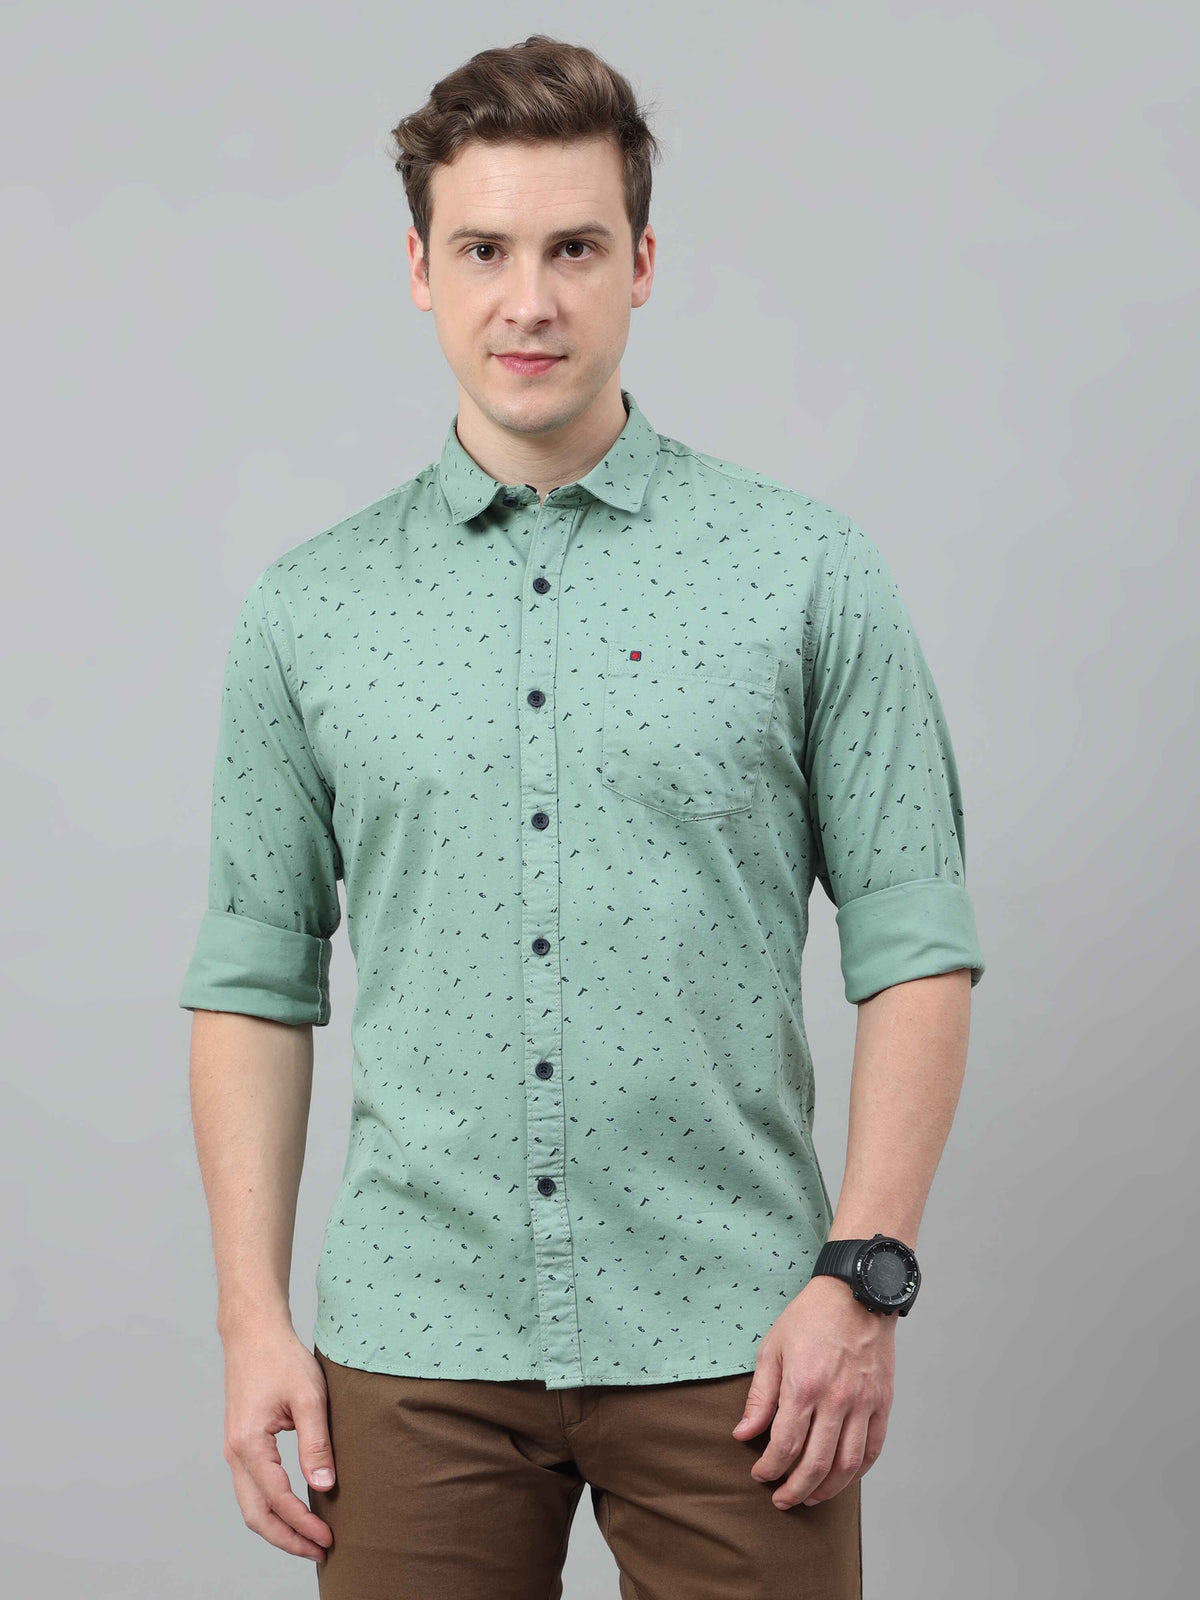 Shop Pista Green Panel Shirt for Men Online at Great Price – COOLCOLORS